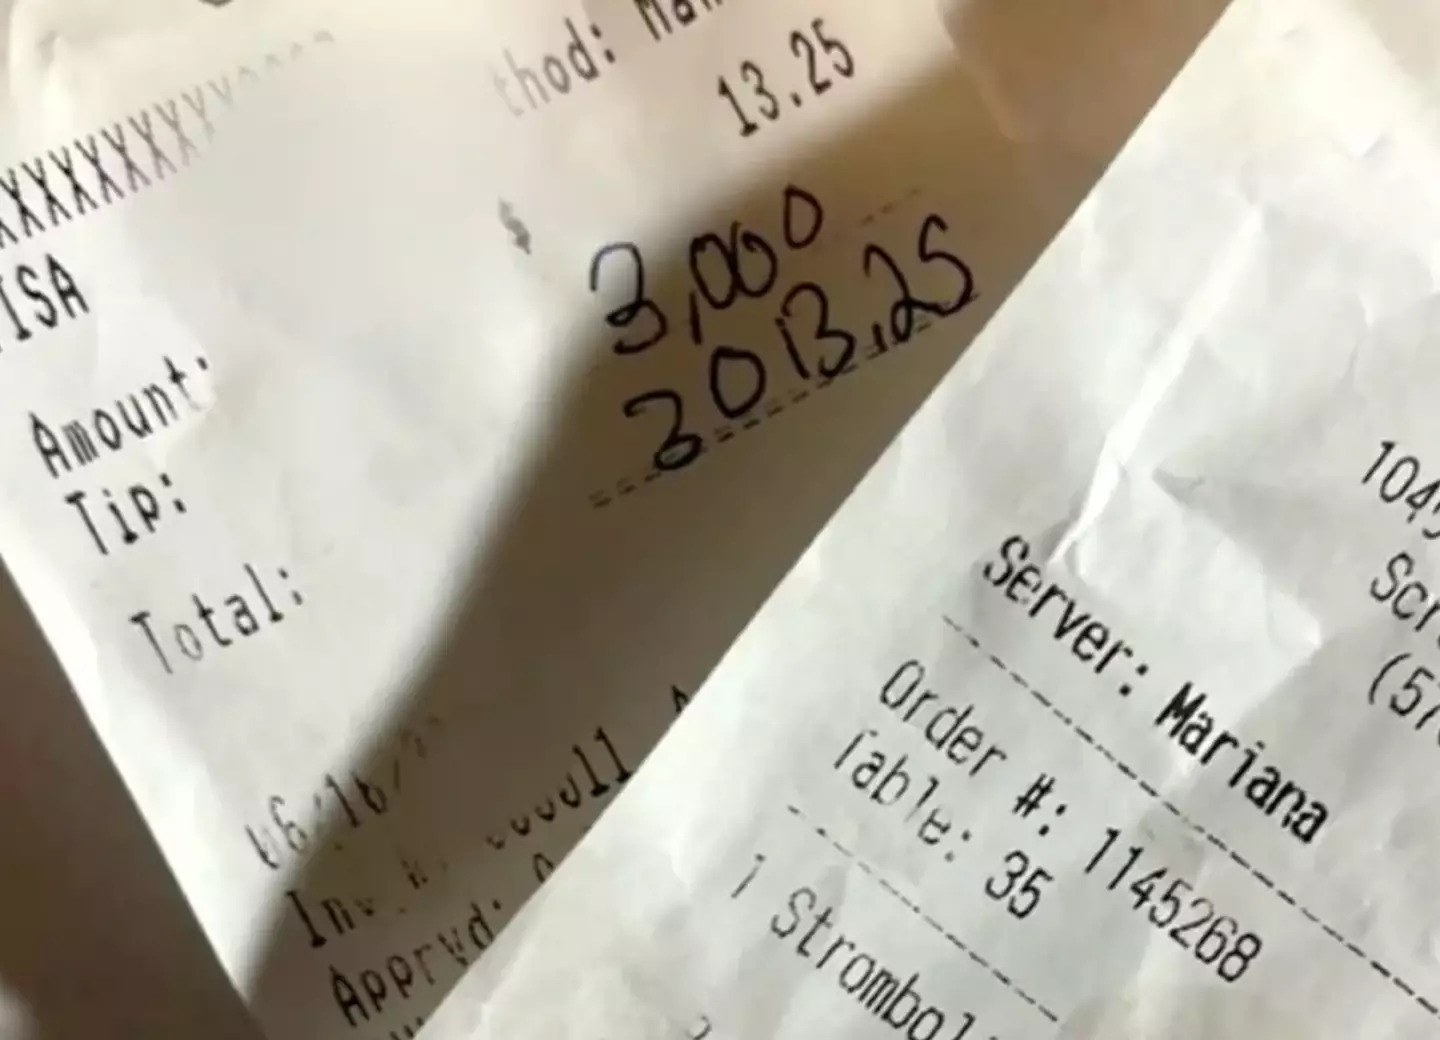 Things quickly turned sour when the tipper asked for the money back. (WNEP)